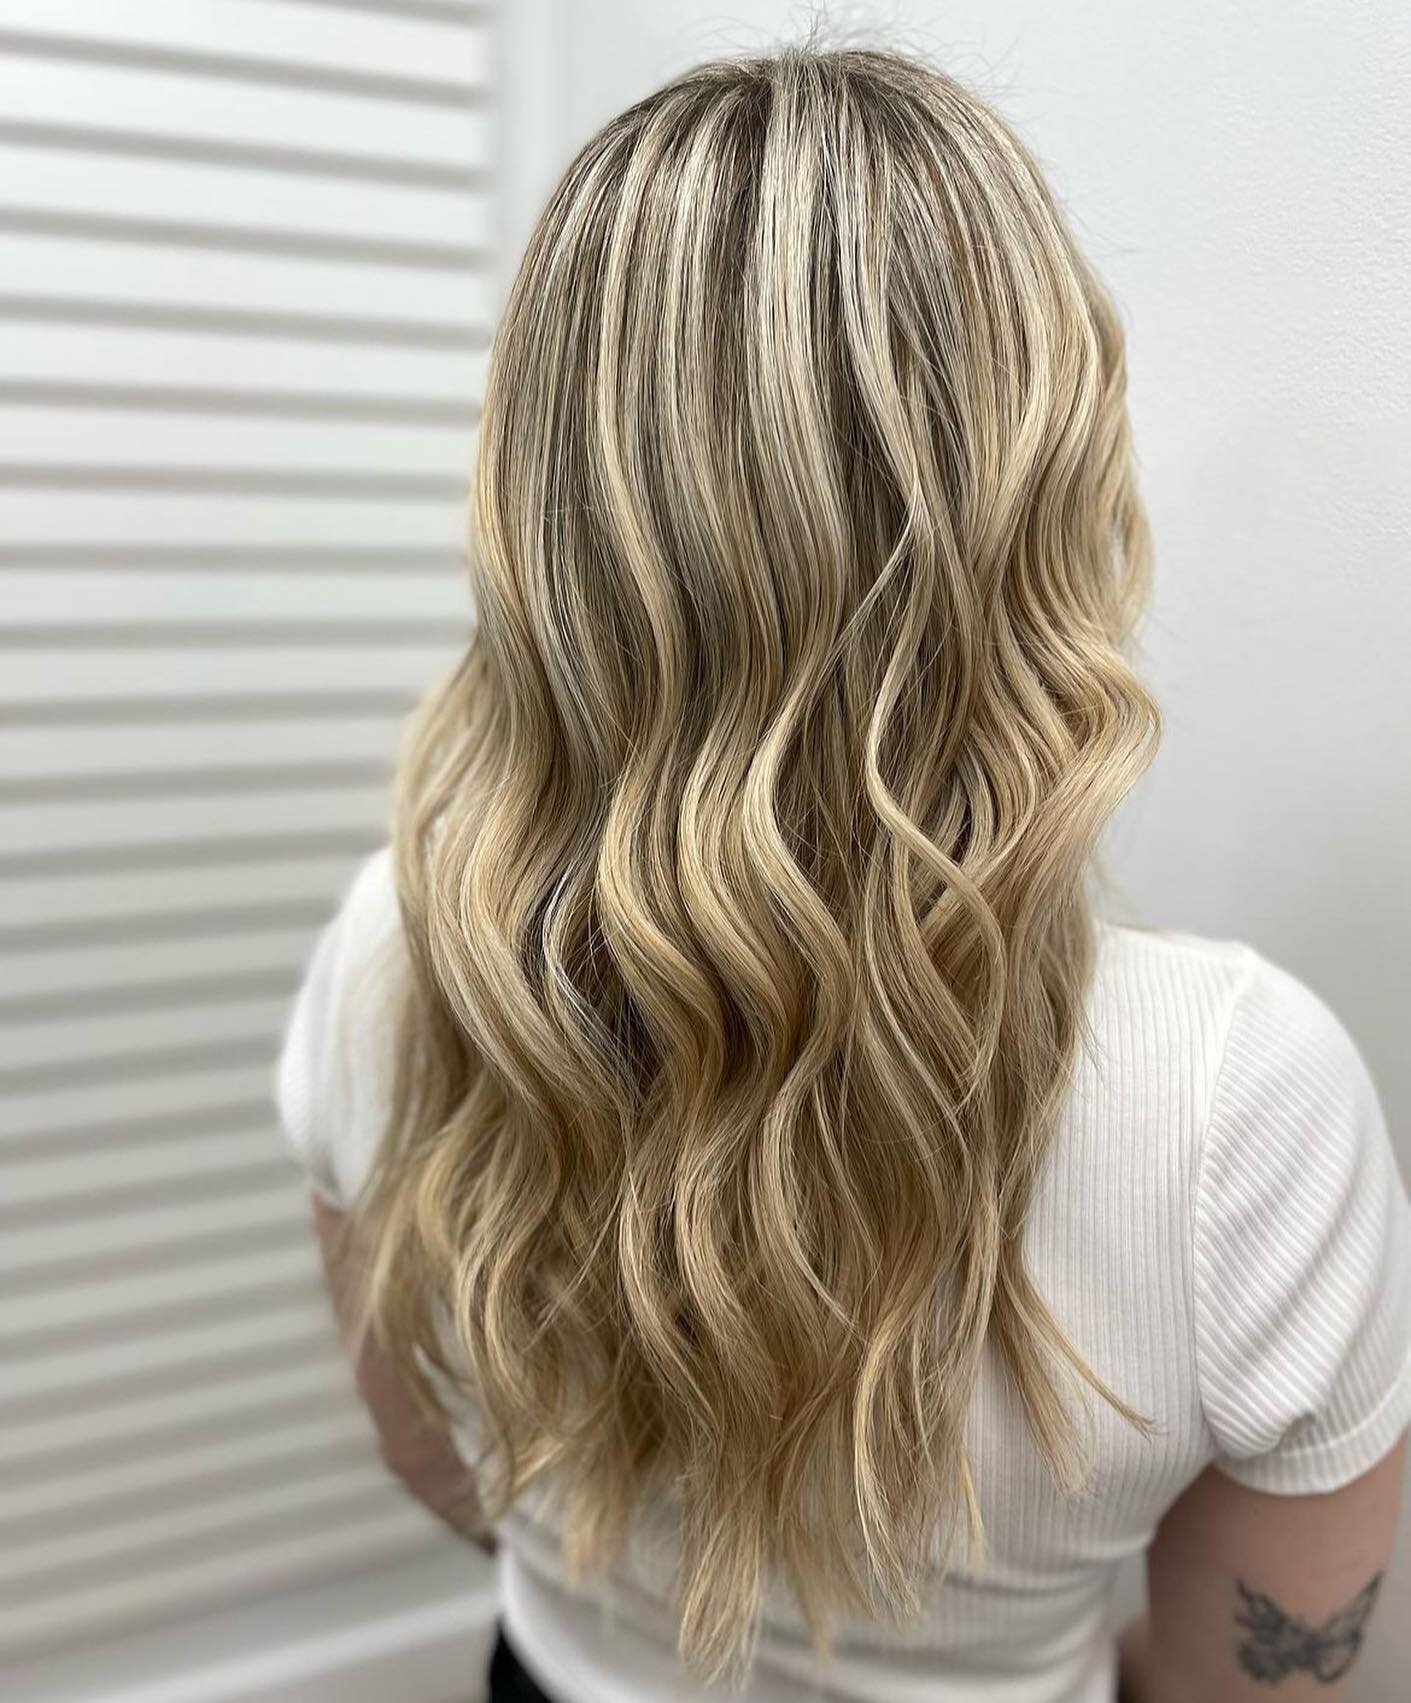 Another beautiful blonde by our talented @styledbymichelle91 

Book a hair appointment in time for summer to leave you looking and feeling beautiful. 

Book on our website or give us a call! 

#beautyhubkw #supportlocalkw #supportlocal #localkw #hair